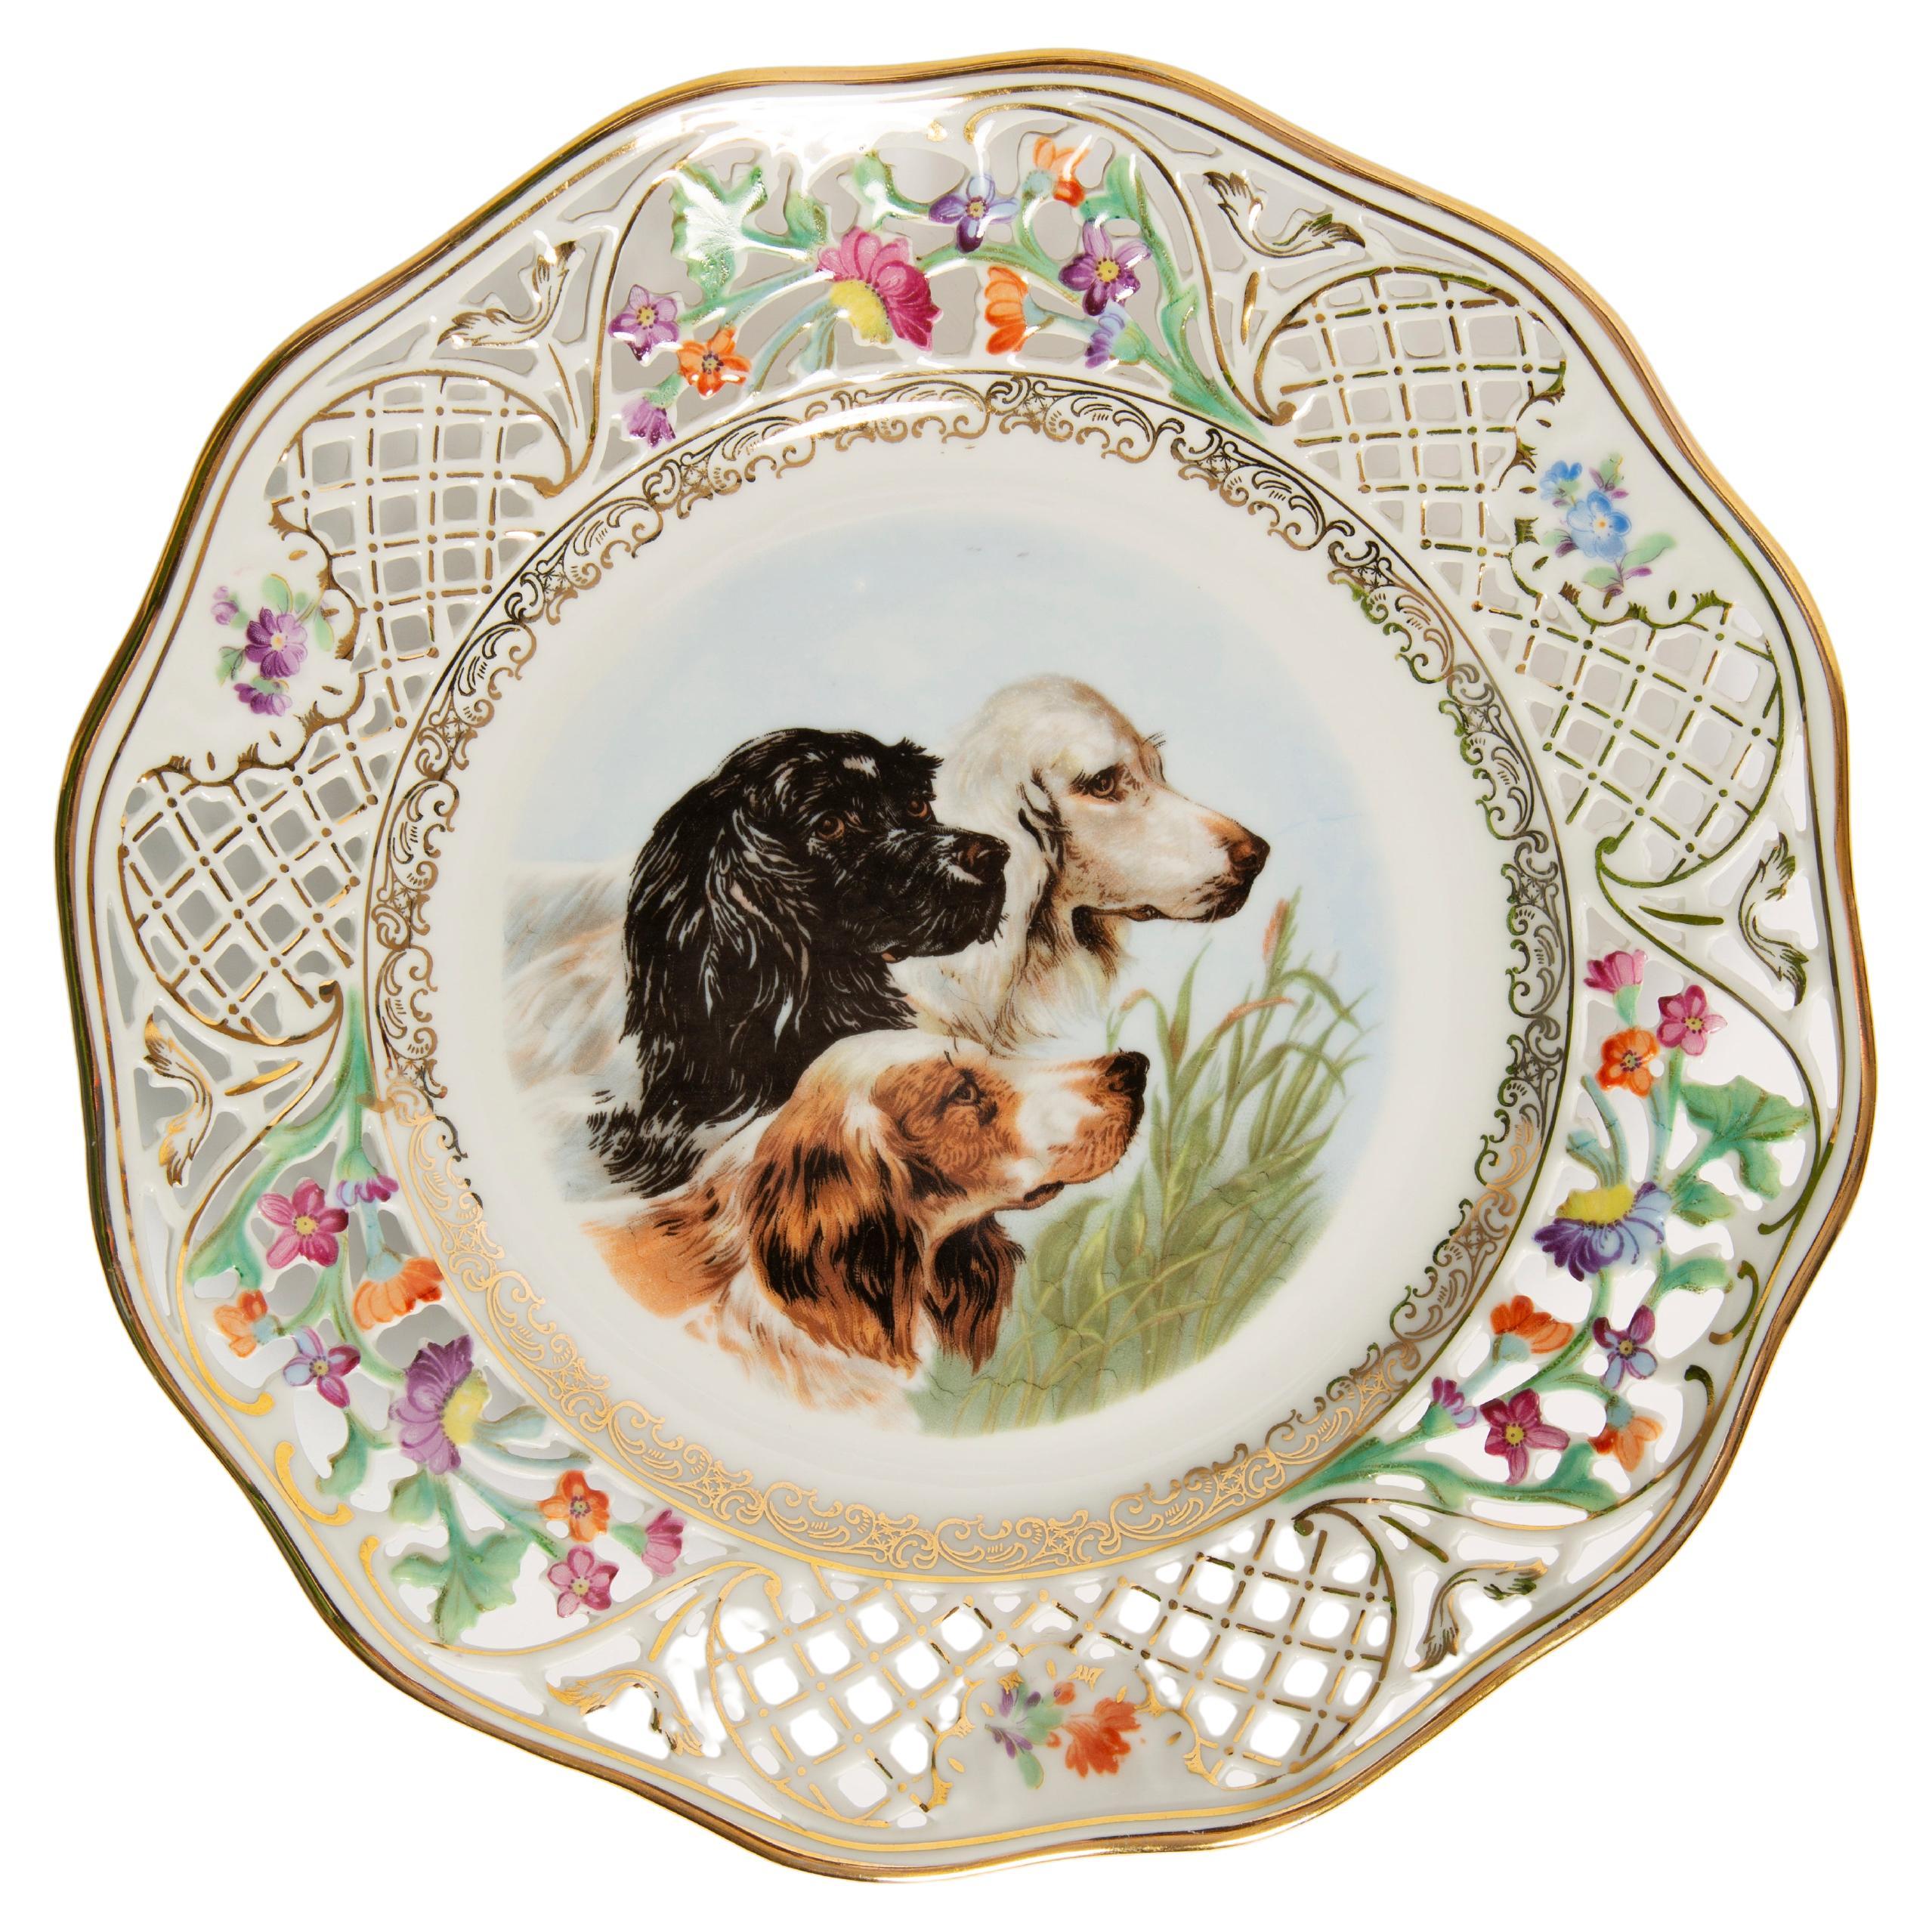 Vintage Spaniel Dog and Flowers Decorative Porcelain Plate, Germany, 1970s For Sale